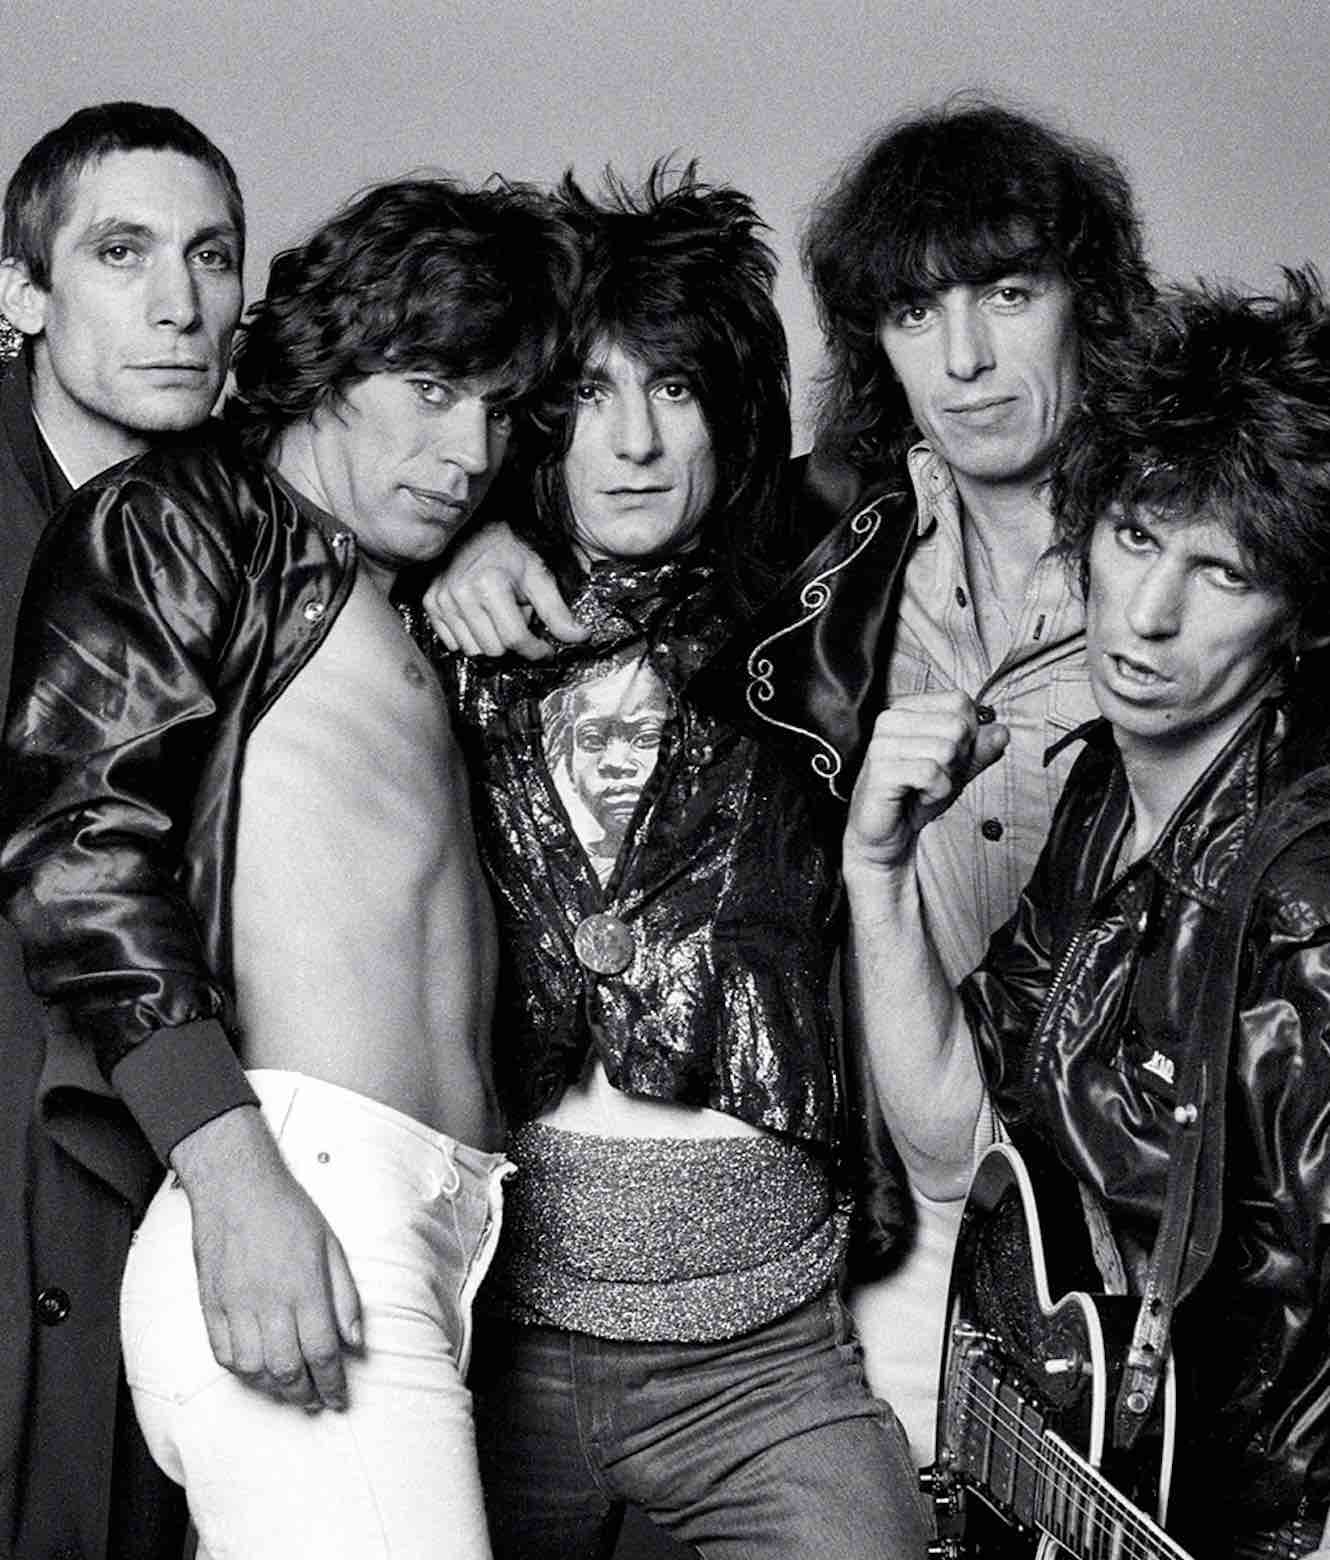 The Rolling Stones as a complete band.